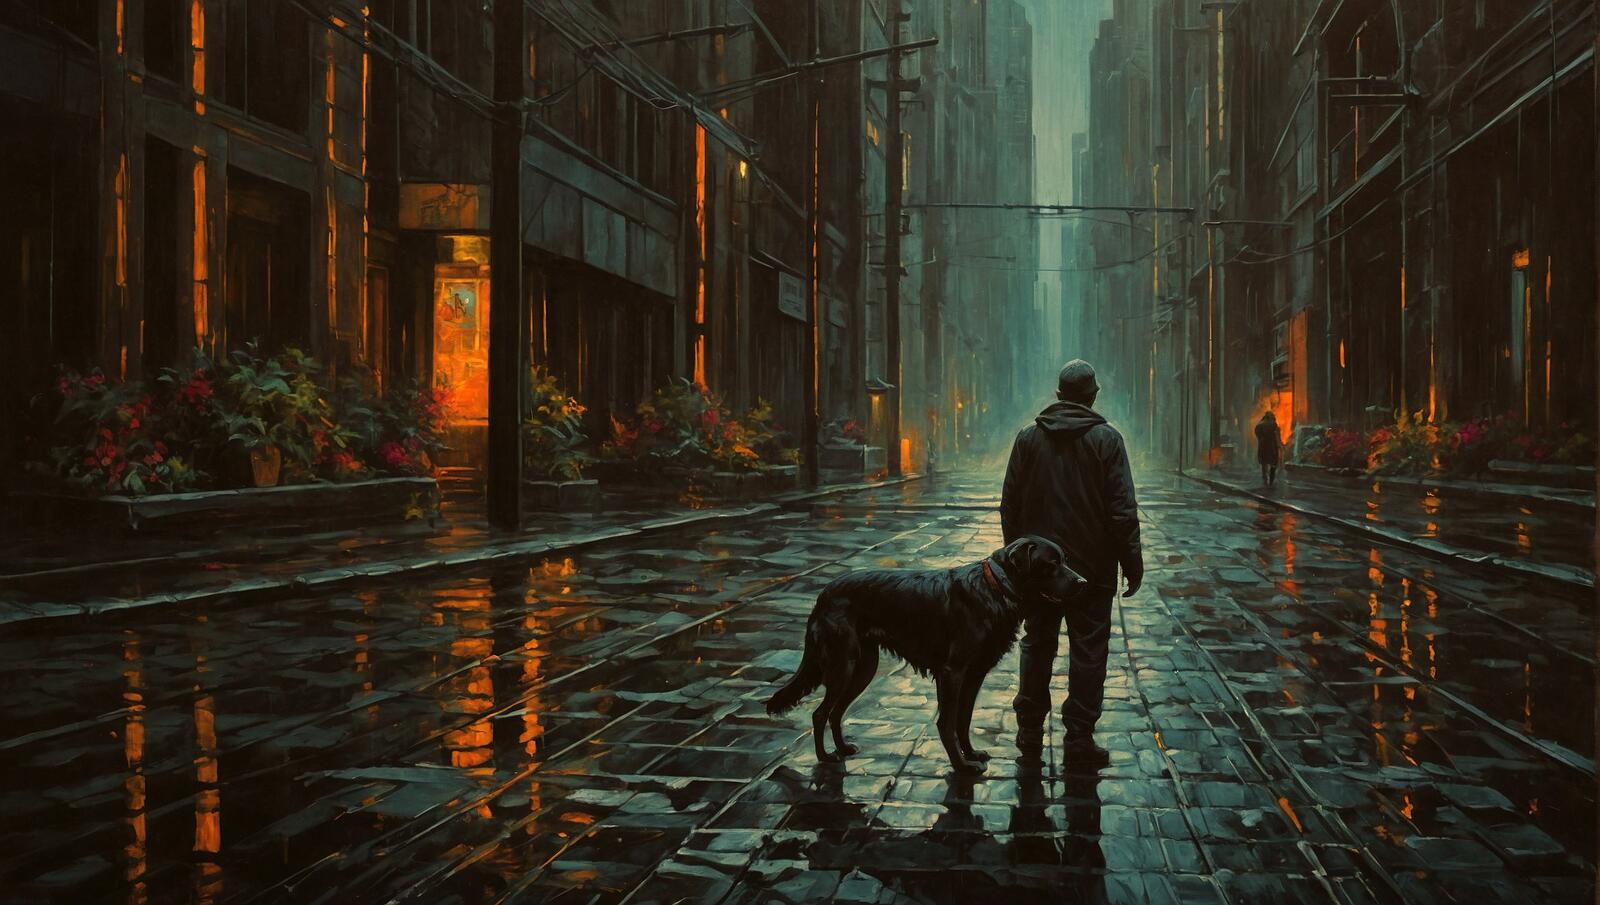 Free photo A person walking their dog in the rain on a dark alley